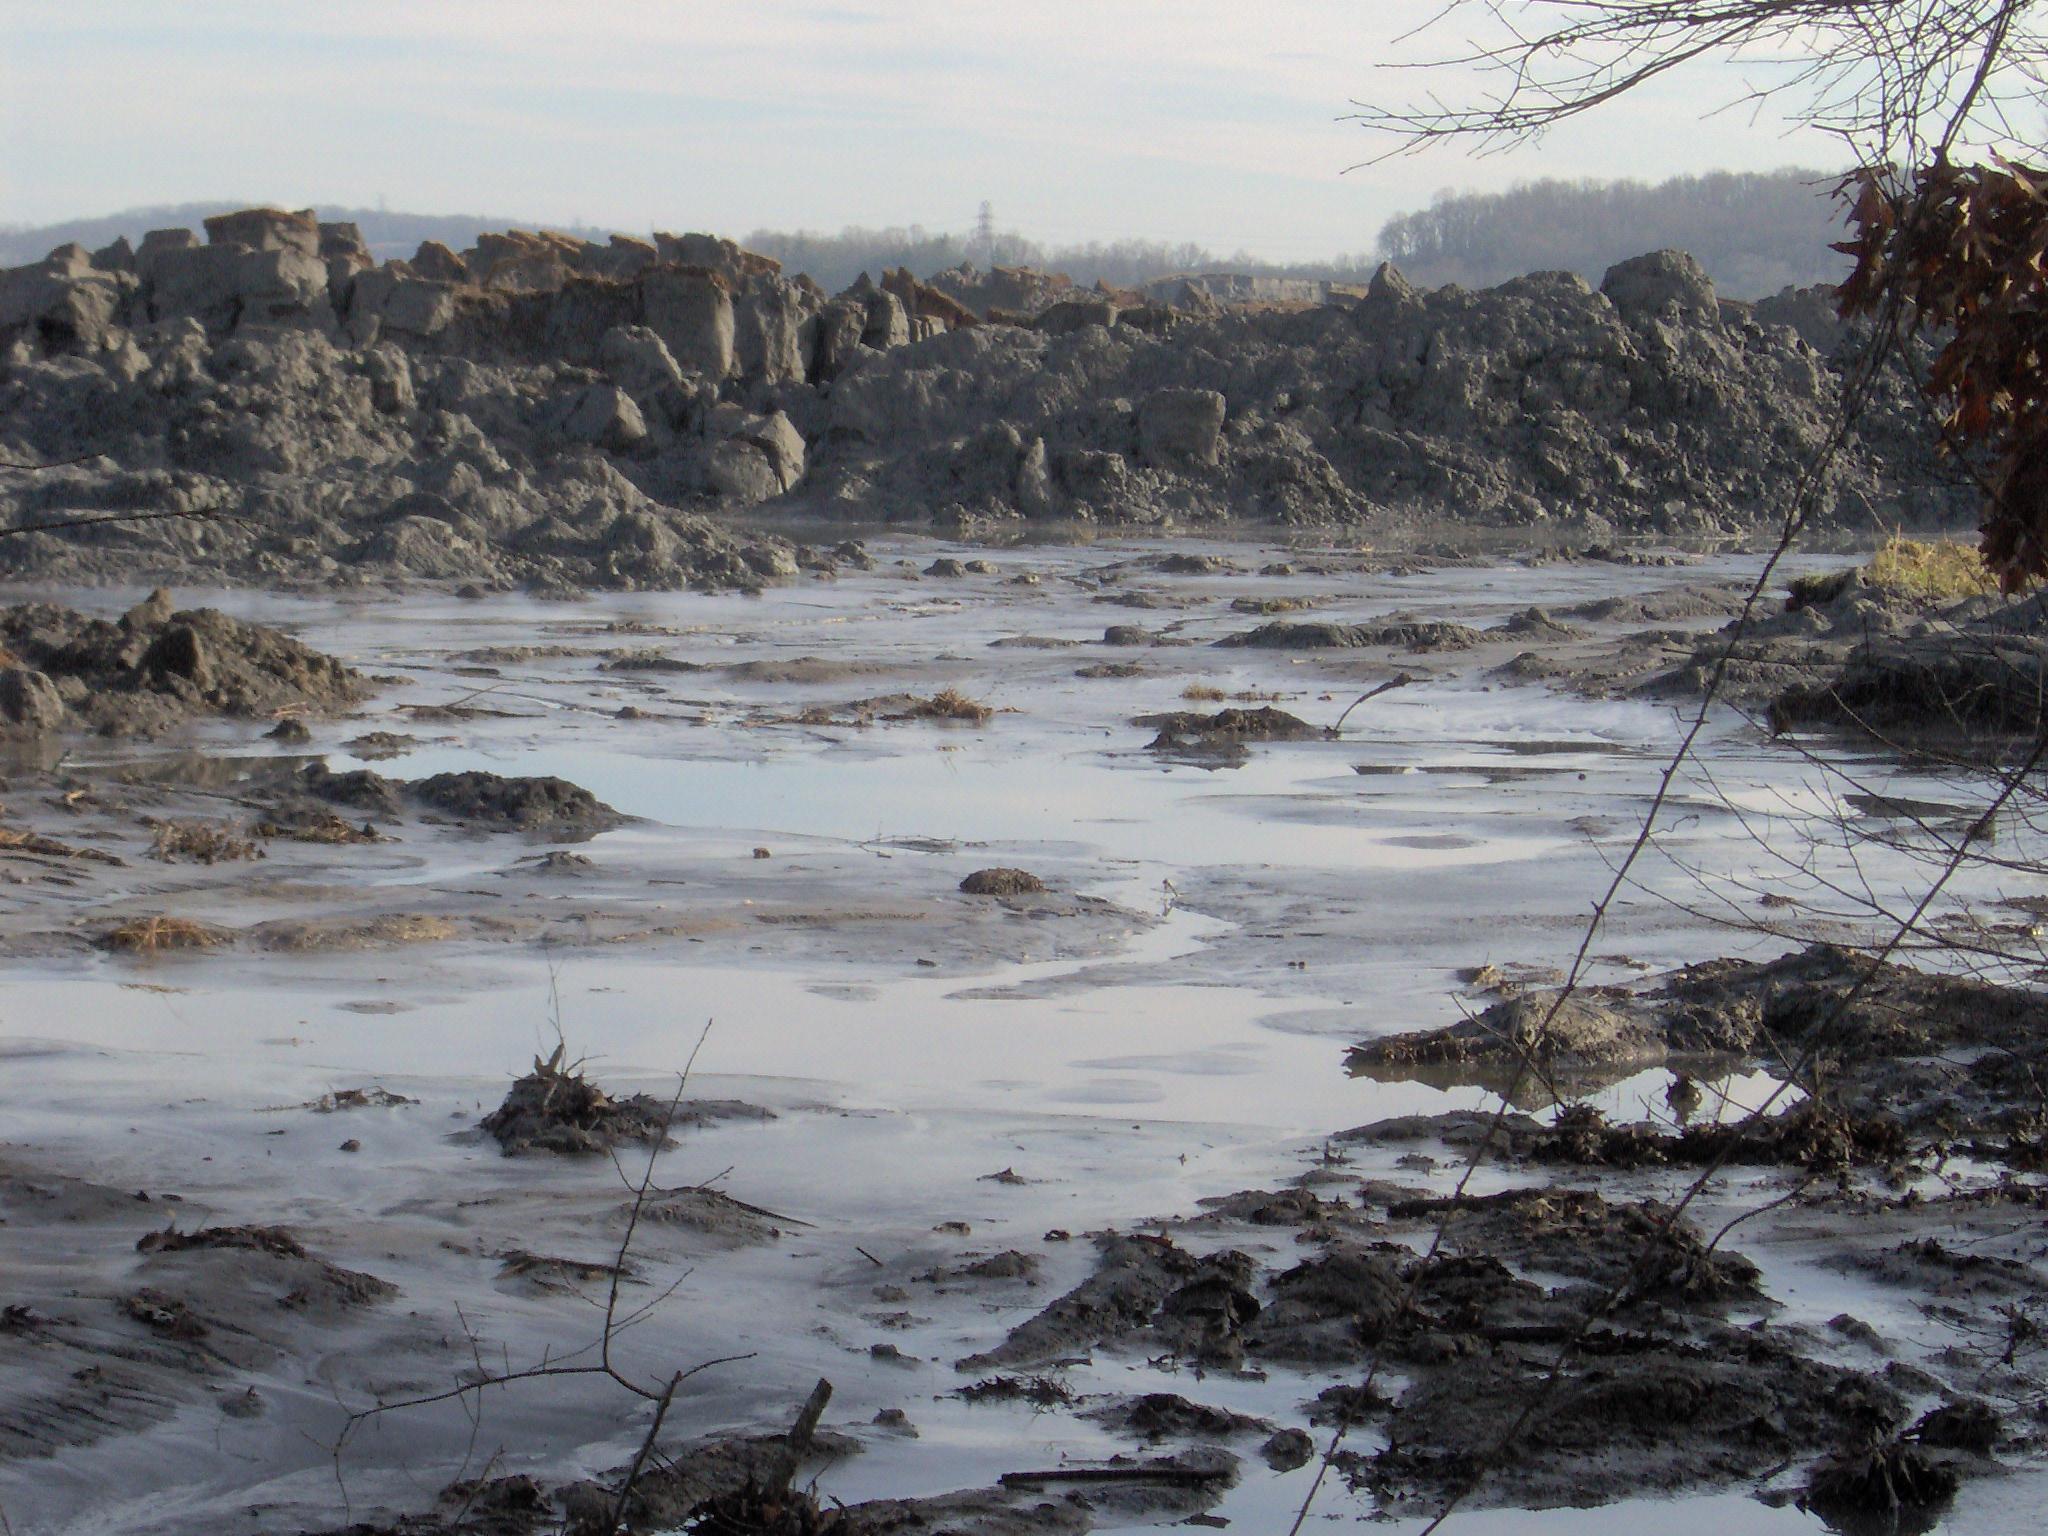 Piles of coal ash after a 2008 spill at the Kingston Fossil Plant in Tennessee. (Brian Stansberry / Wikimedia Commons)